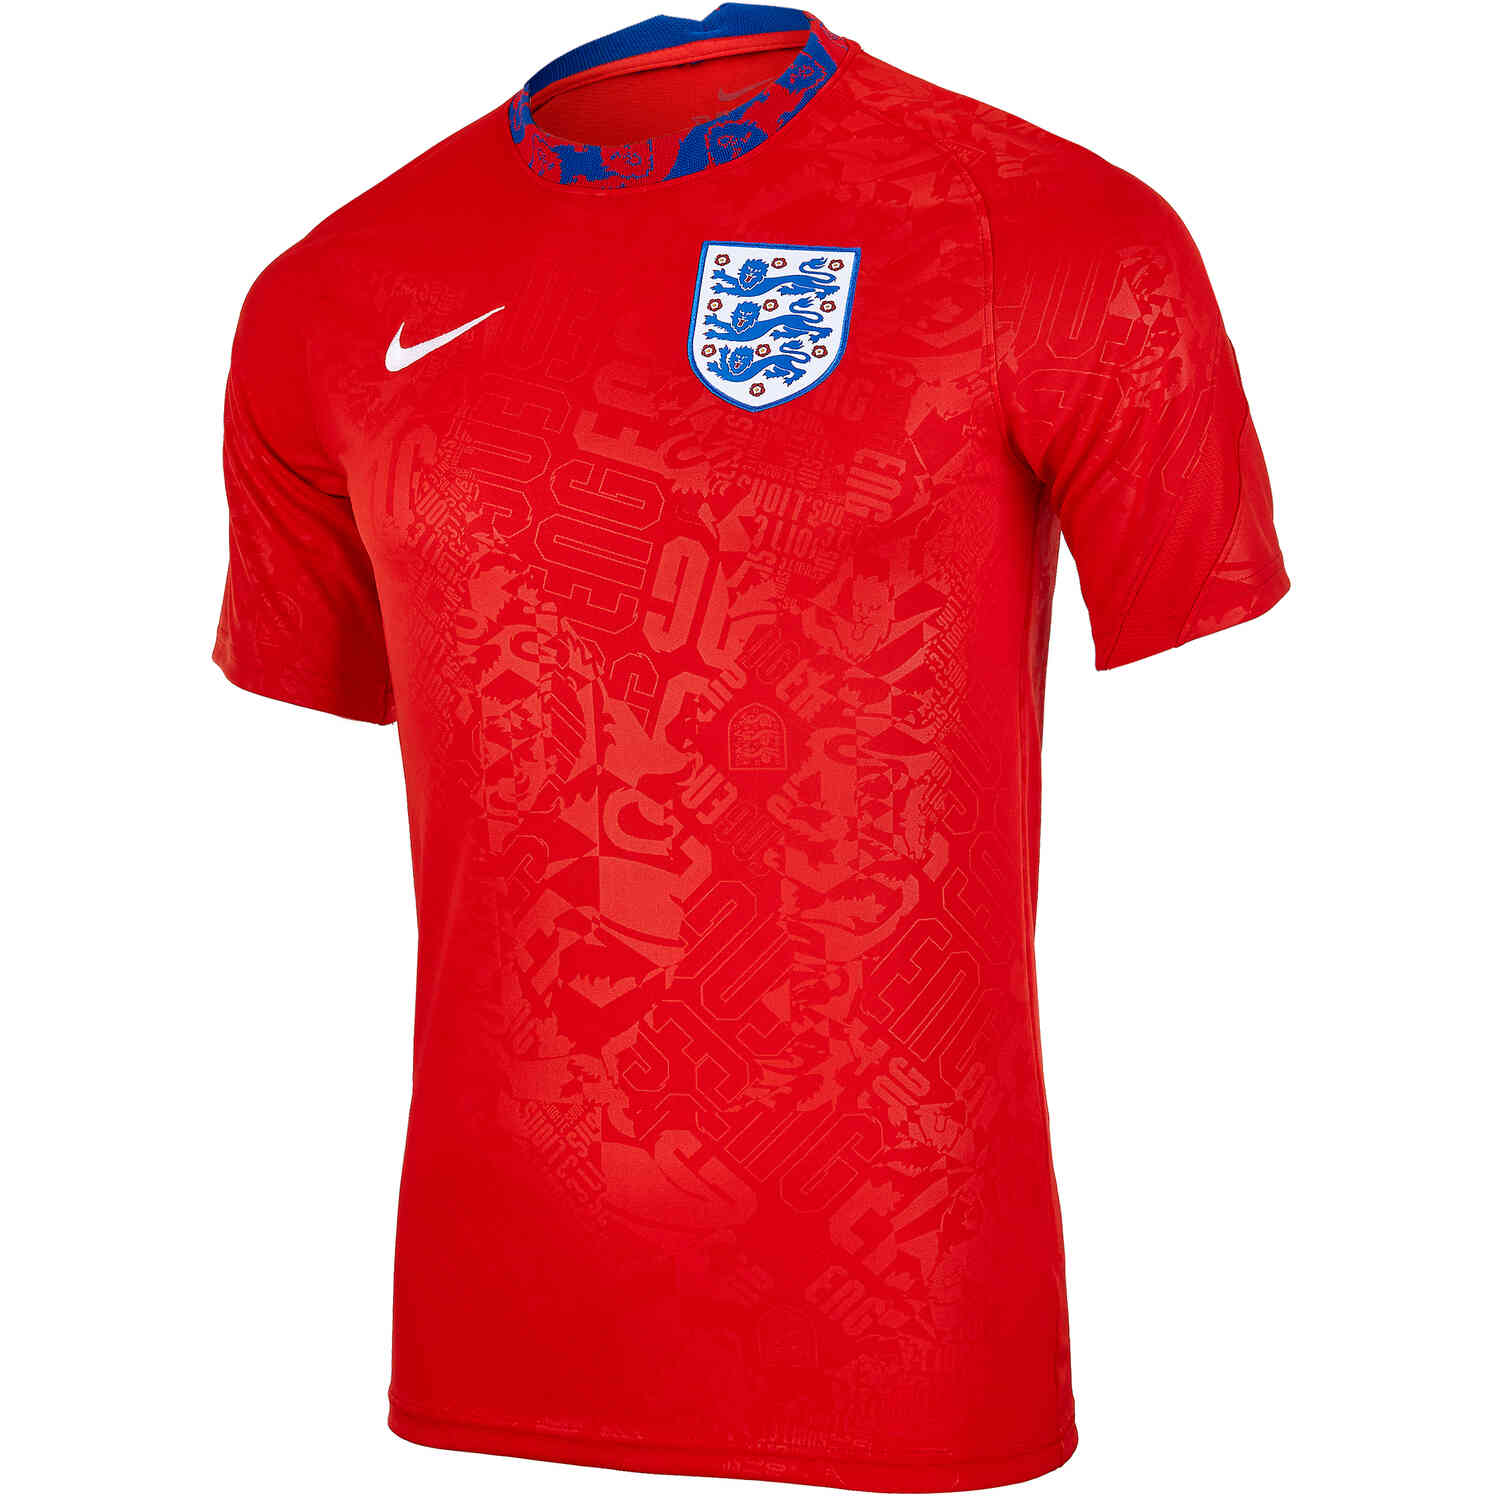 Nike Pre-Match Top - Challenge Red & White - Soccer Master